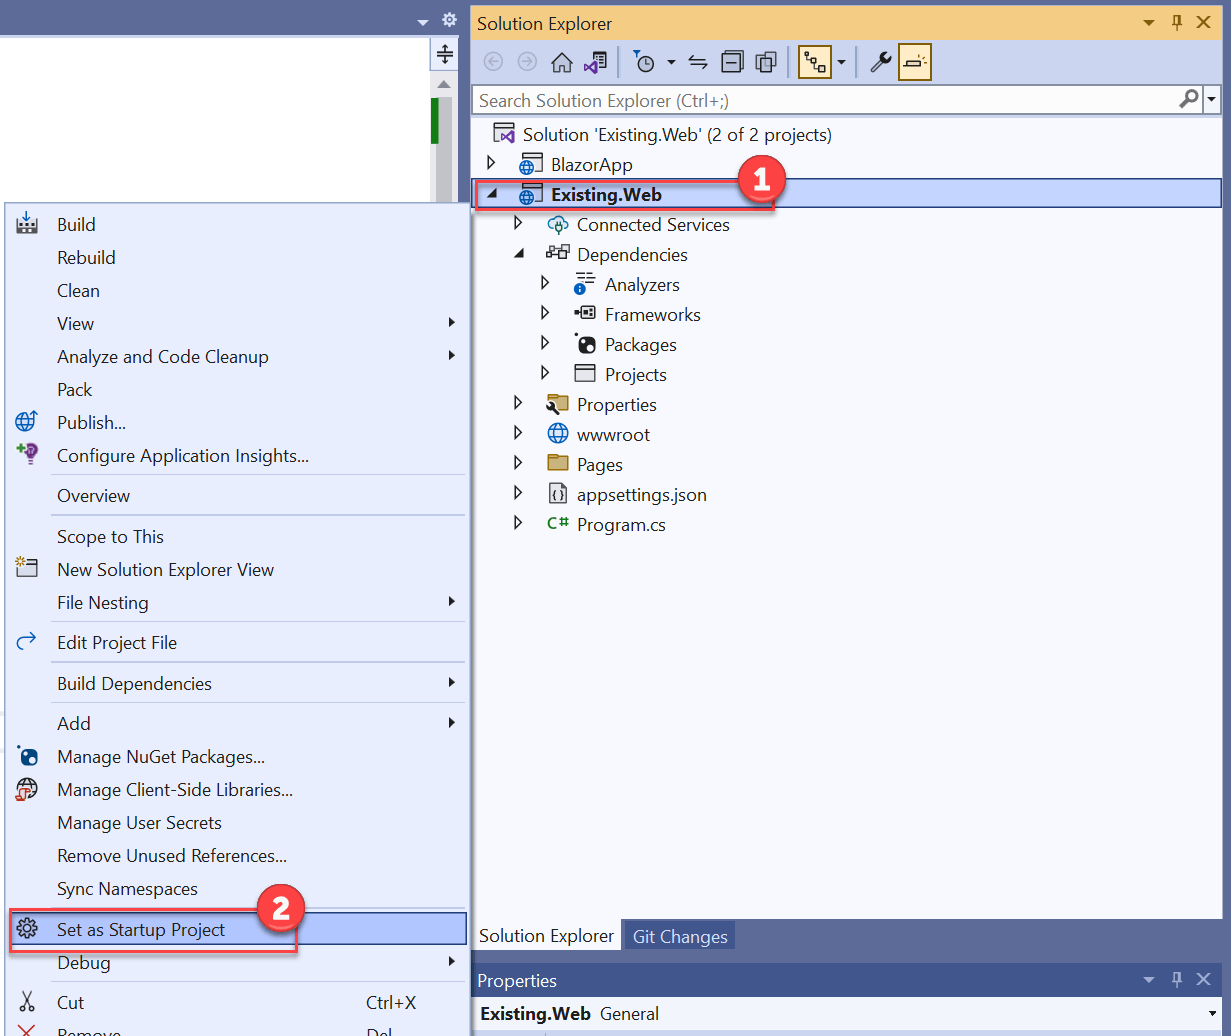 The Solution Explorer displays with the context menu expanded on the Existing.Web project. The Set as Startup Project item is highlighted.